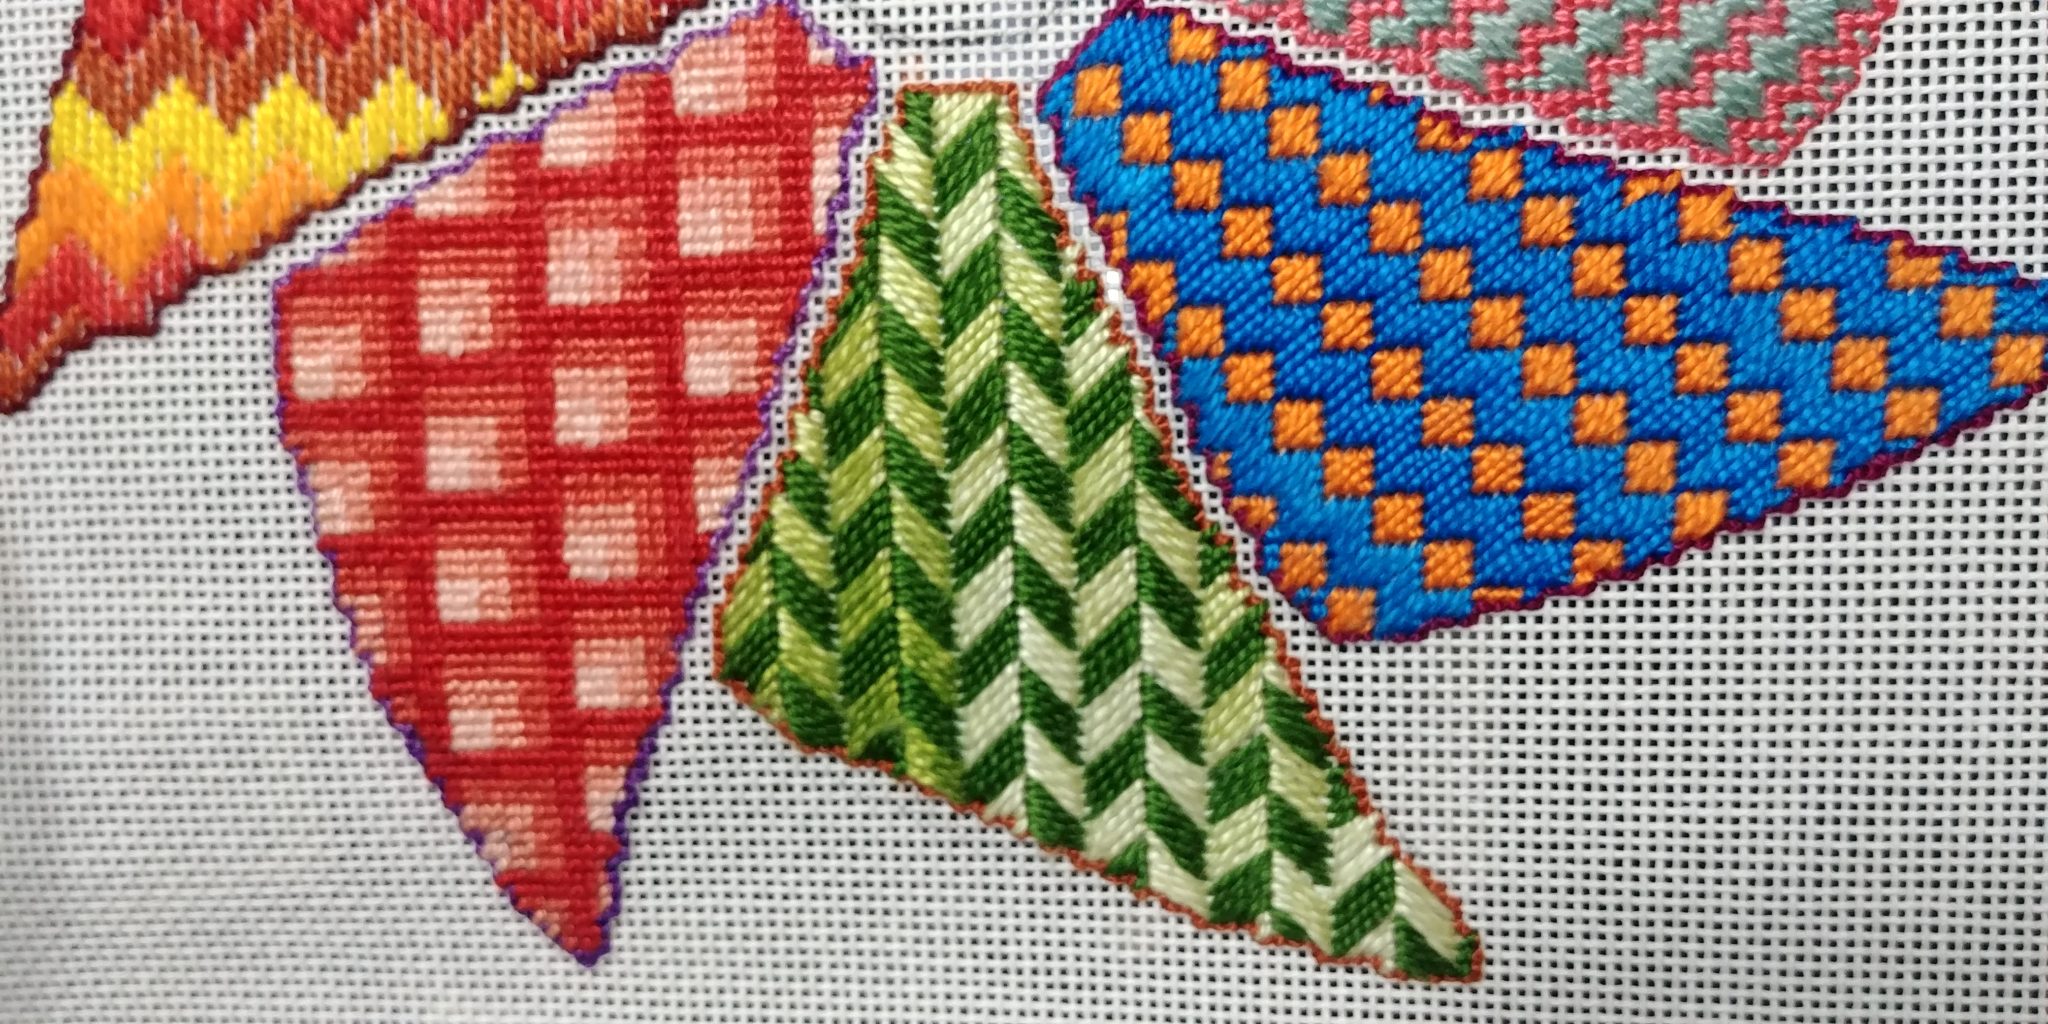 Needlepoint Canvas Types: Choose the Perfect One for Your Project